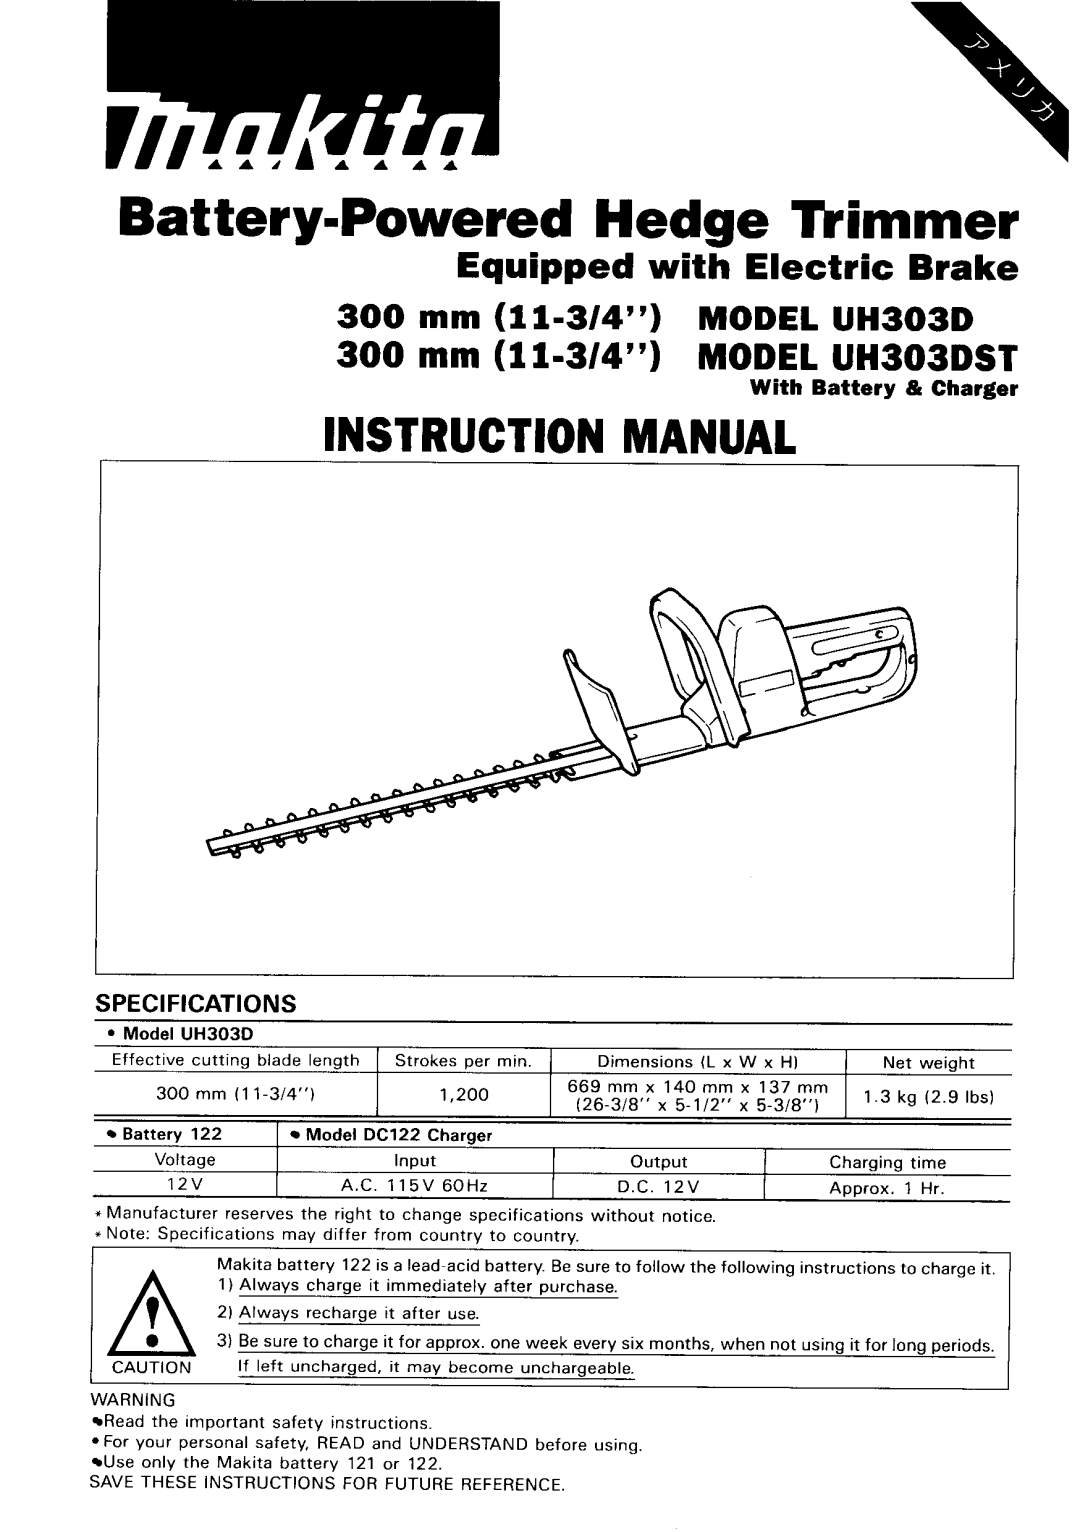 Makita instruction manual 300 mm 11-3/4MODEL UH303DST, With Battery & Charger, Specifications 